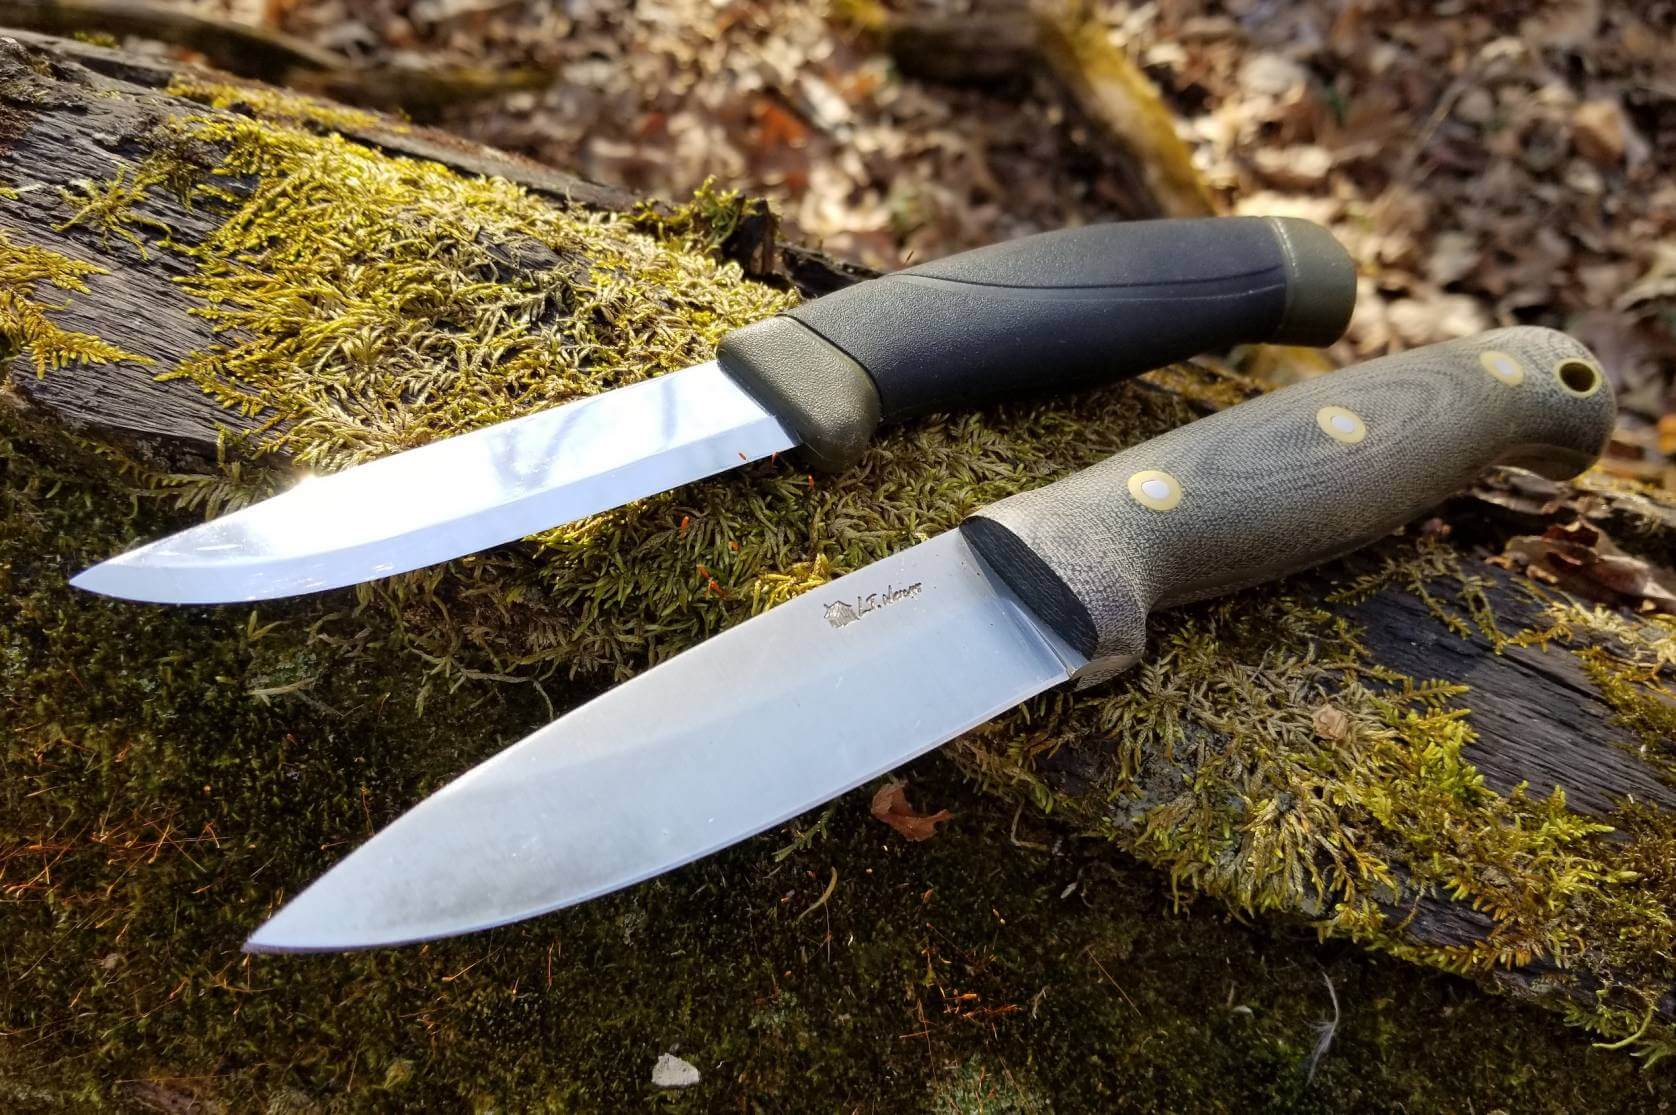 Best Mora Knife for Bushcraft, Survival, Outdoors 2021 Review